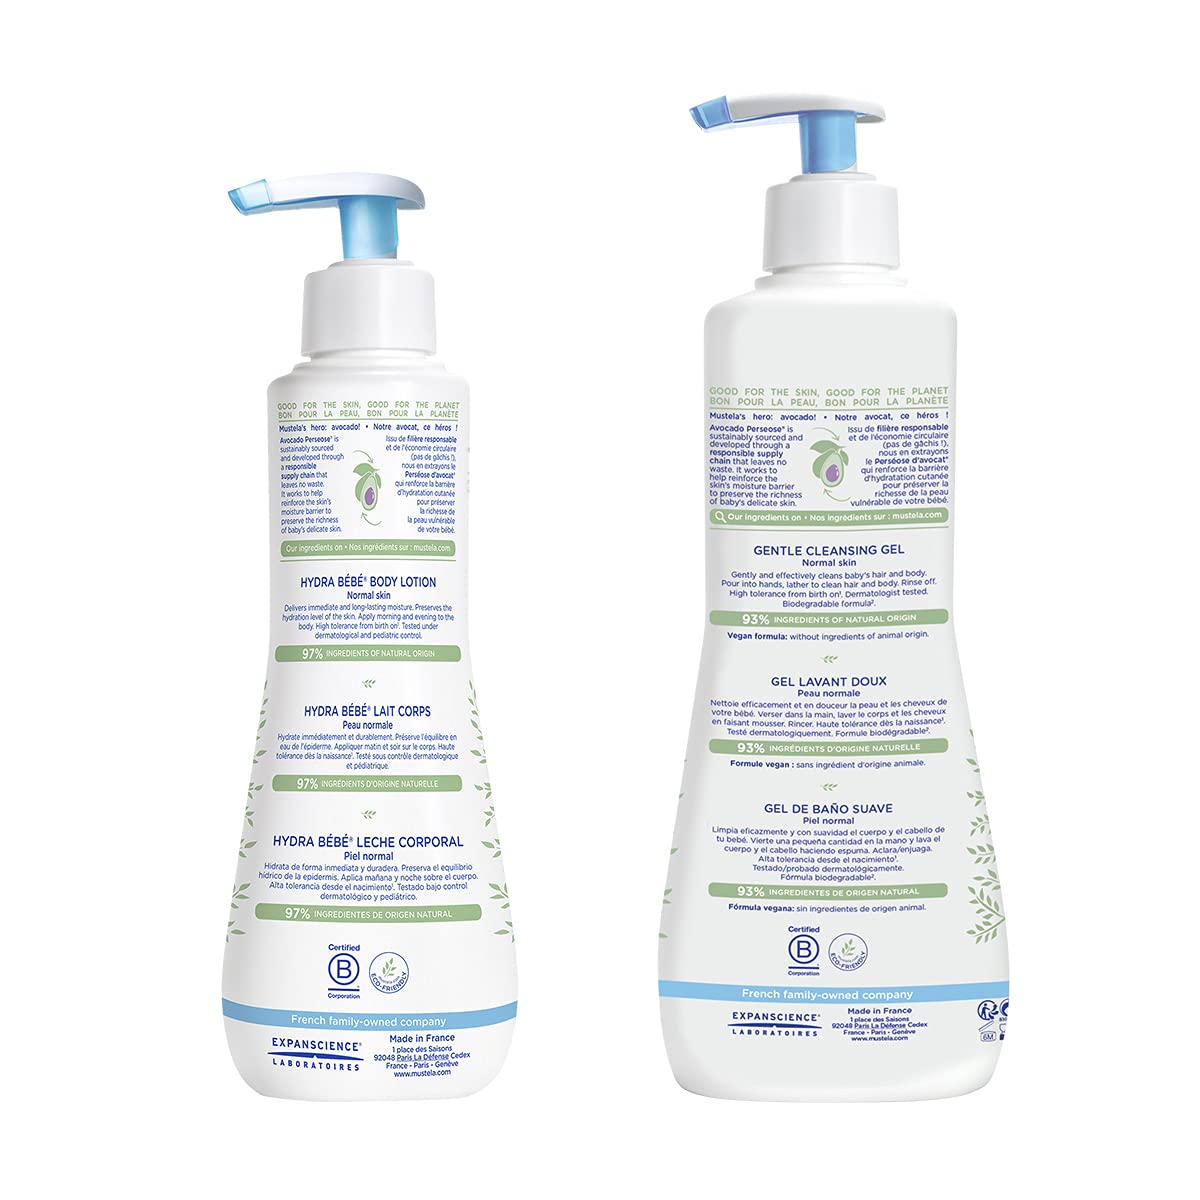 Mustela Baby Bath Time Gift Set - Baby Skin Care Essentials with Natural Avocado - Contains Hydra Bebe Body Lotion 10.14 fl. oz. & Gentle Cleansing Gel 16.9 fl. oz. - 2 Items Set